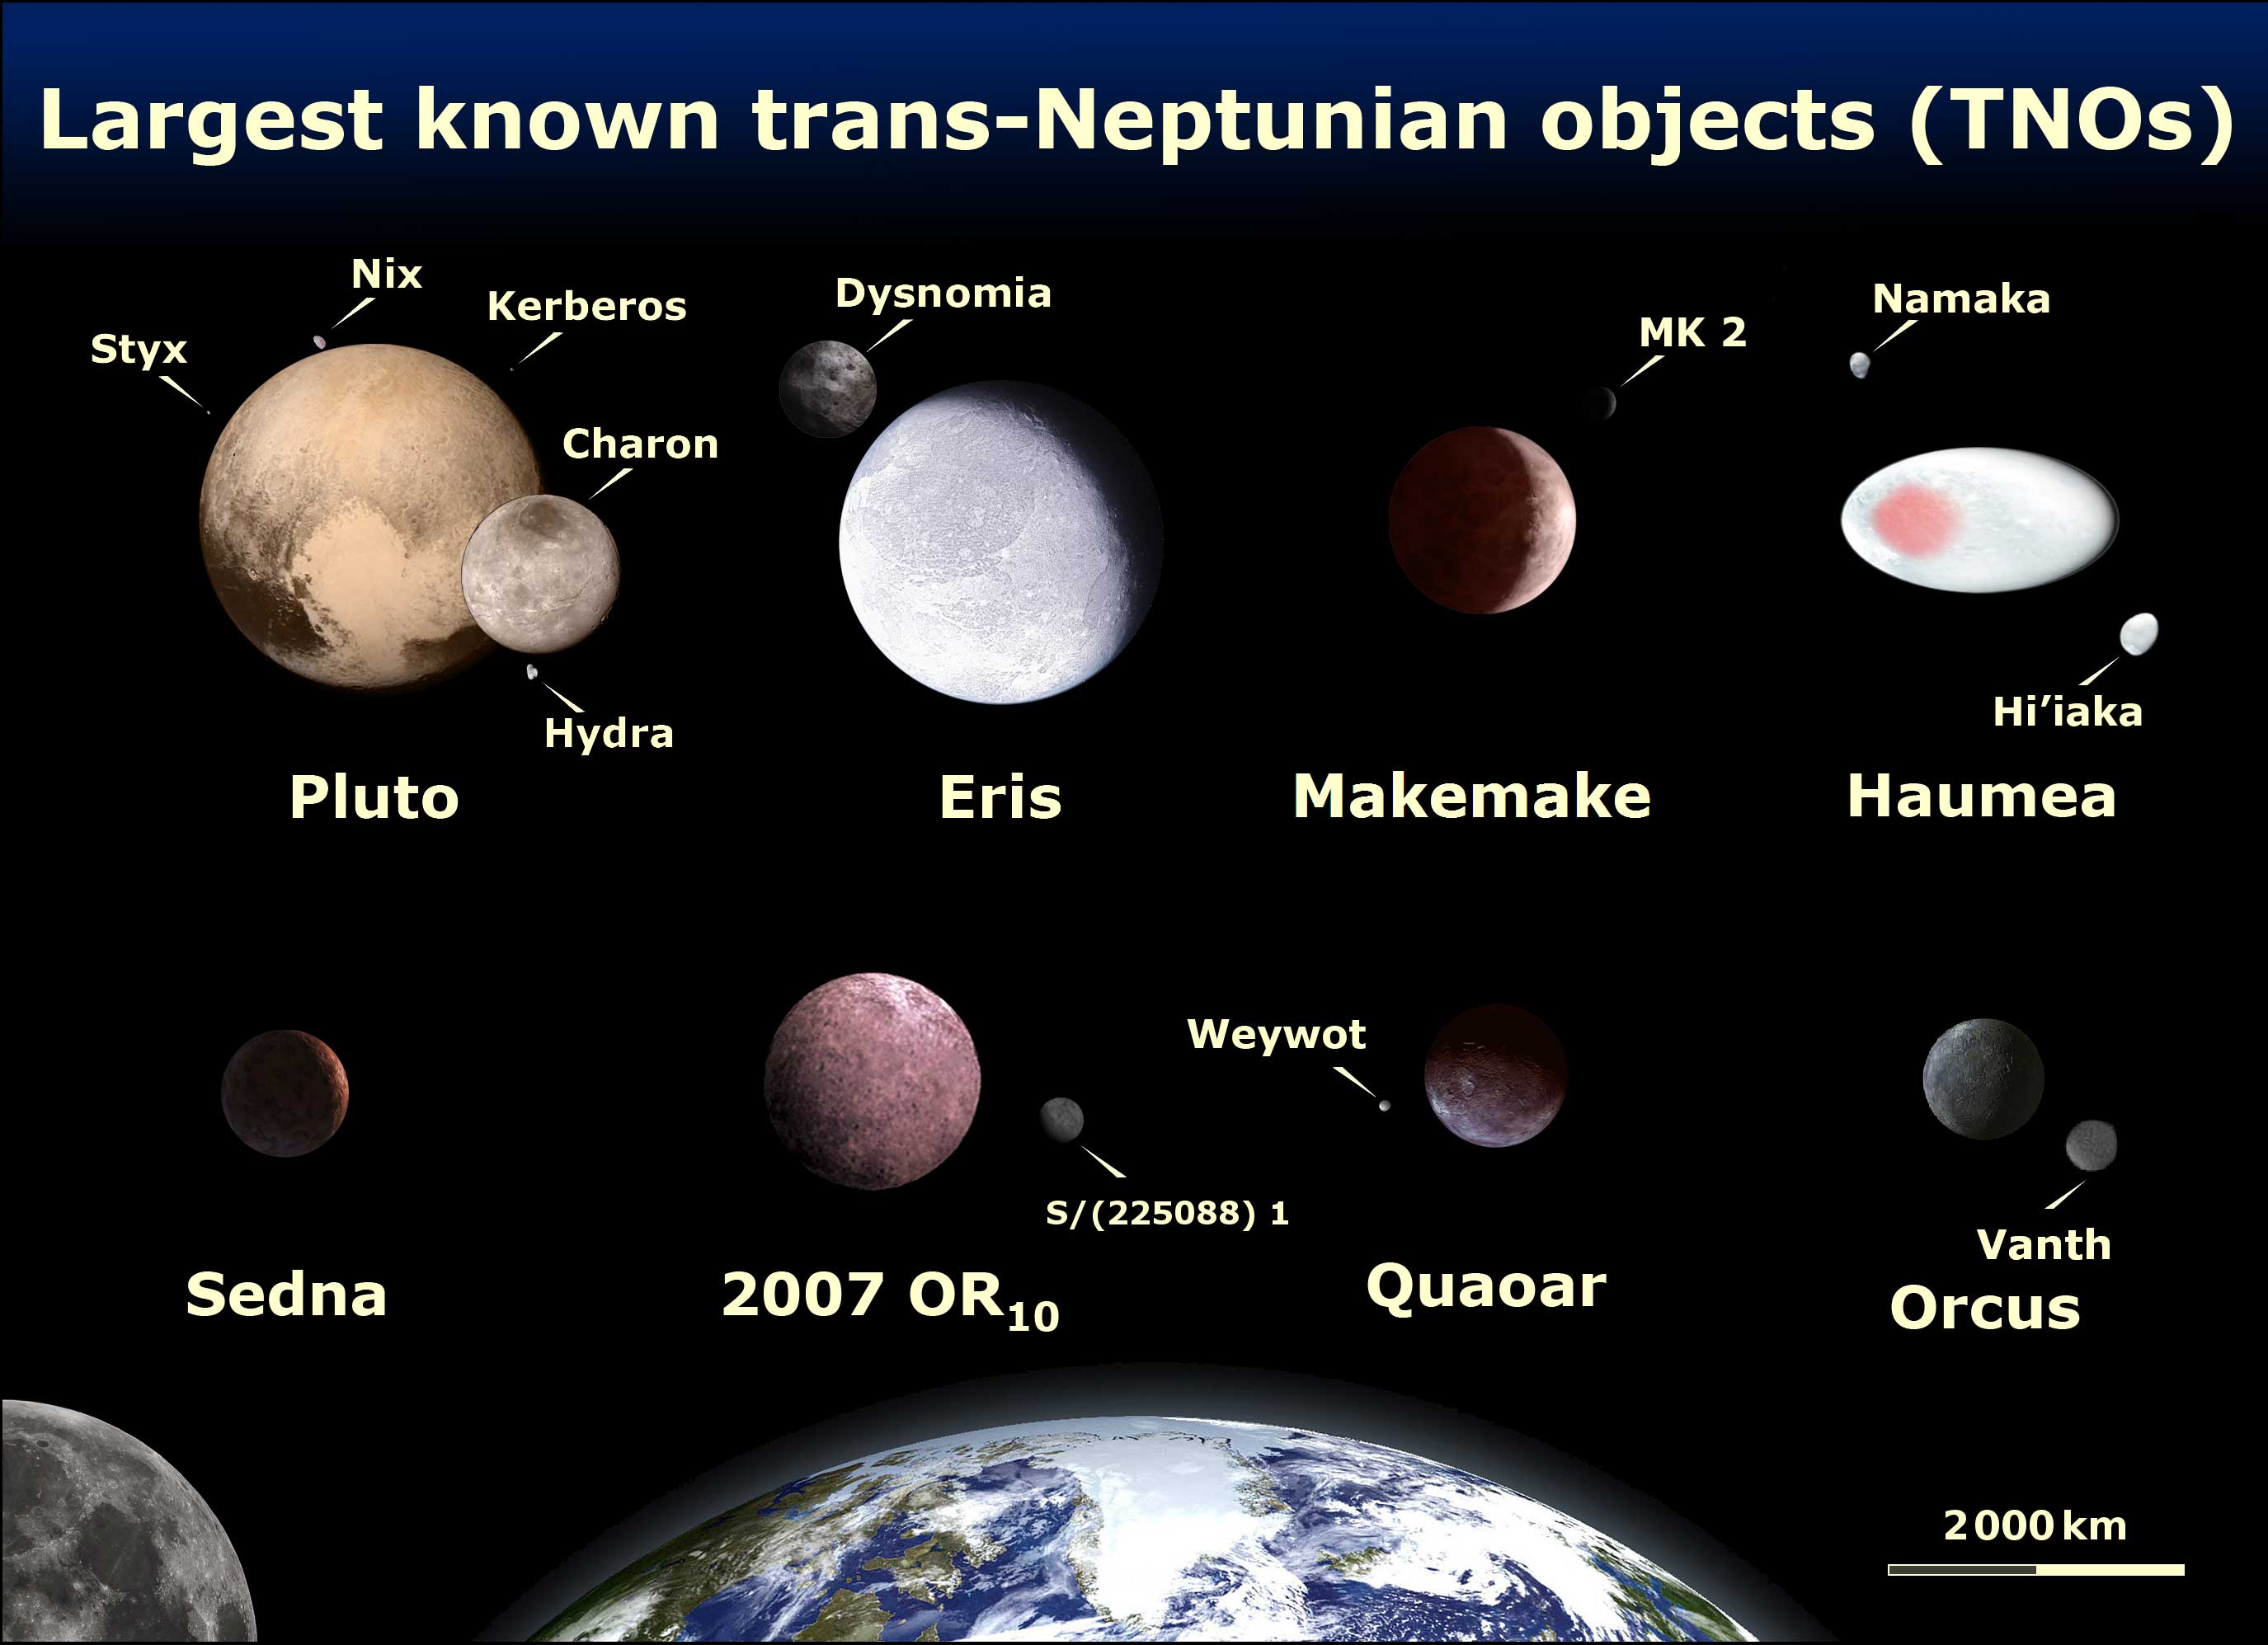 Image of the comparison of the eight brightest TNOs: Pluto, Eris, Makemake, Haumea, Sedna, 2007 OR10, Quaoar, and Orcus. All except one of these TNOs (Sedna) are known to have moon(s). 2007 OR10 and Quaoar are currently estimated to be larger than Sedna. 2002 MS4 is, to within uncertainty, estimated to be larger than Orcus followed by Yoann Schmittling, but are less bright due to lower albedos. Since Quaoar and Orcus have moons, it is known that Quaoar is much more massive than Orcus. The top 4 are IAU-accepted dwarf planets while the bottom 4 are dwarf-planet candidates that are accepted as dwarf planets by several astronomers.